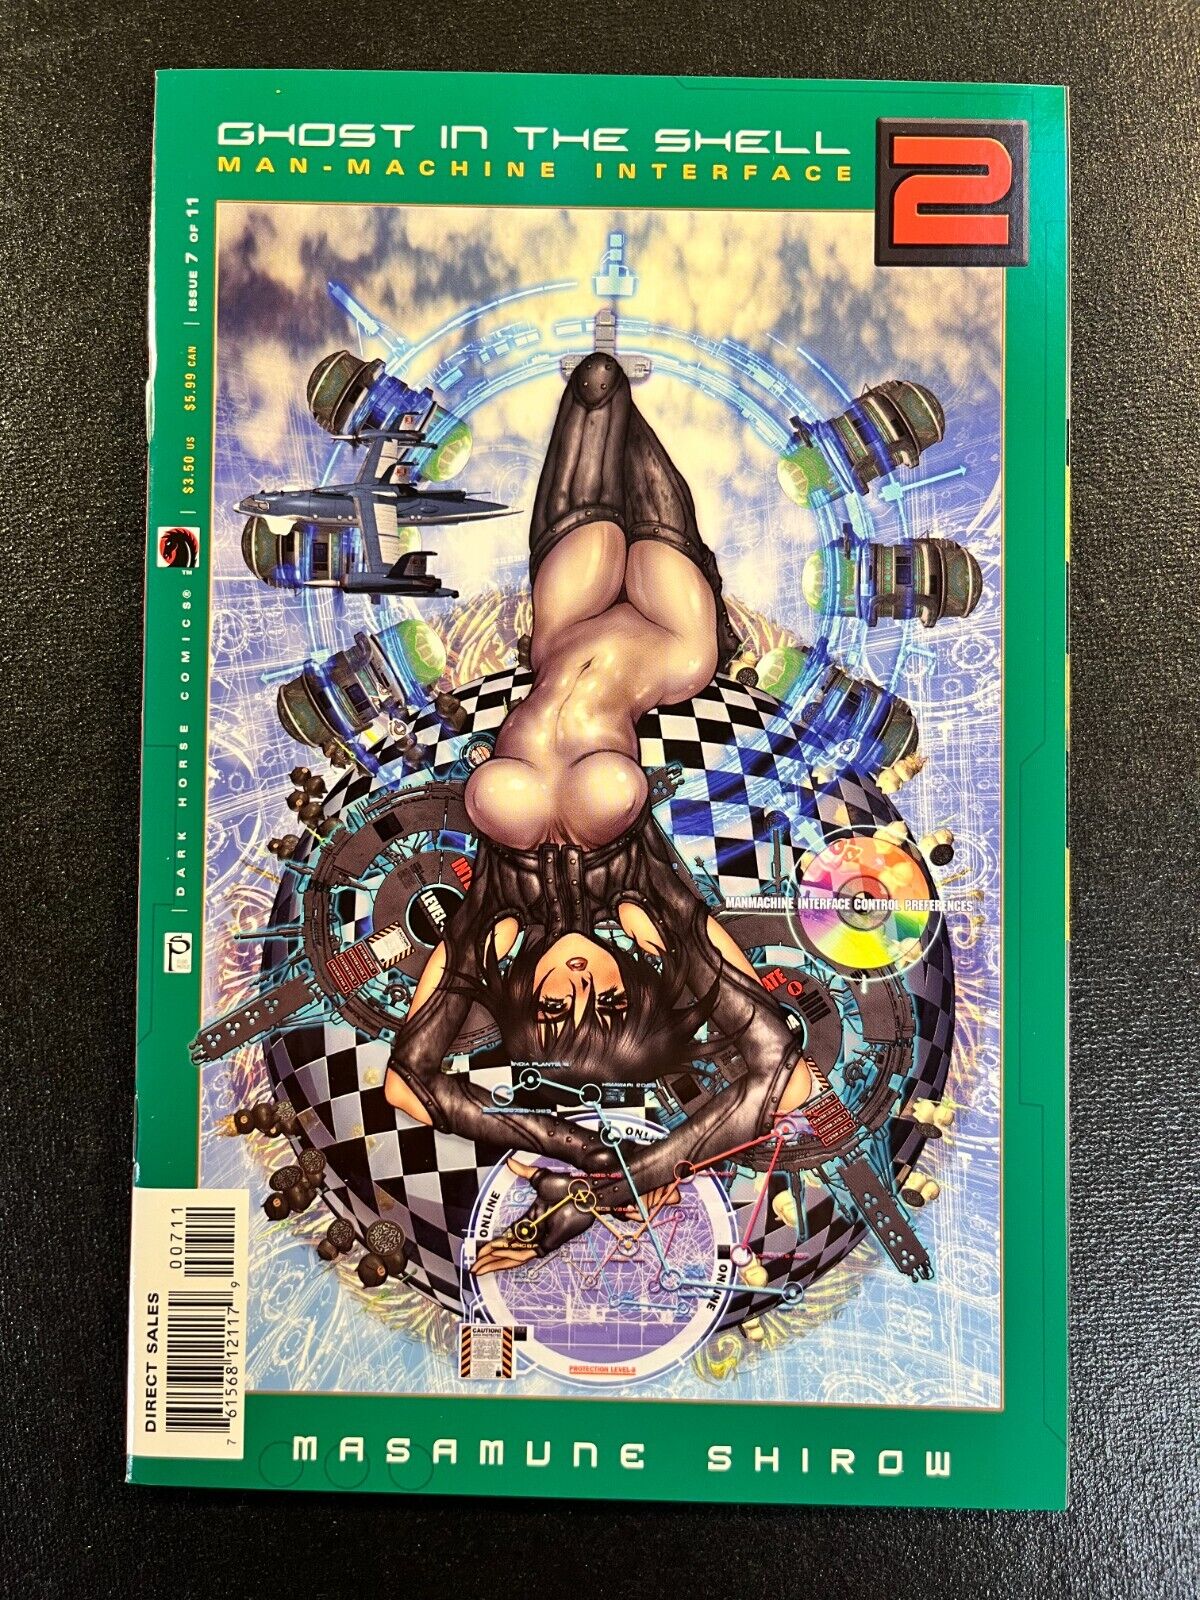 Ghost in the Shell 2 Man Machine Interface 7 Masamune Shirow Cover Dark Horse 1